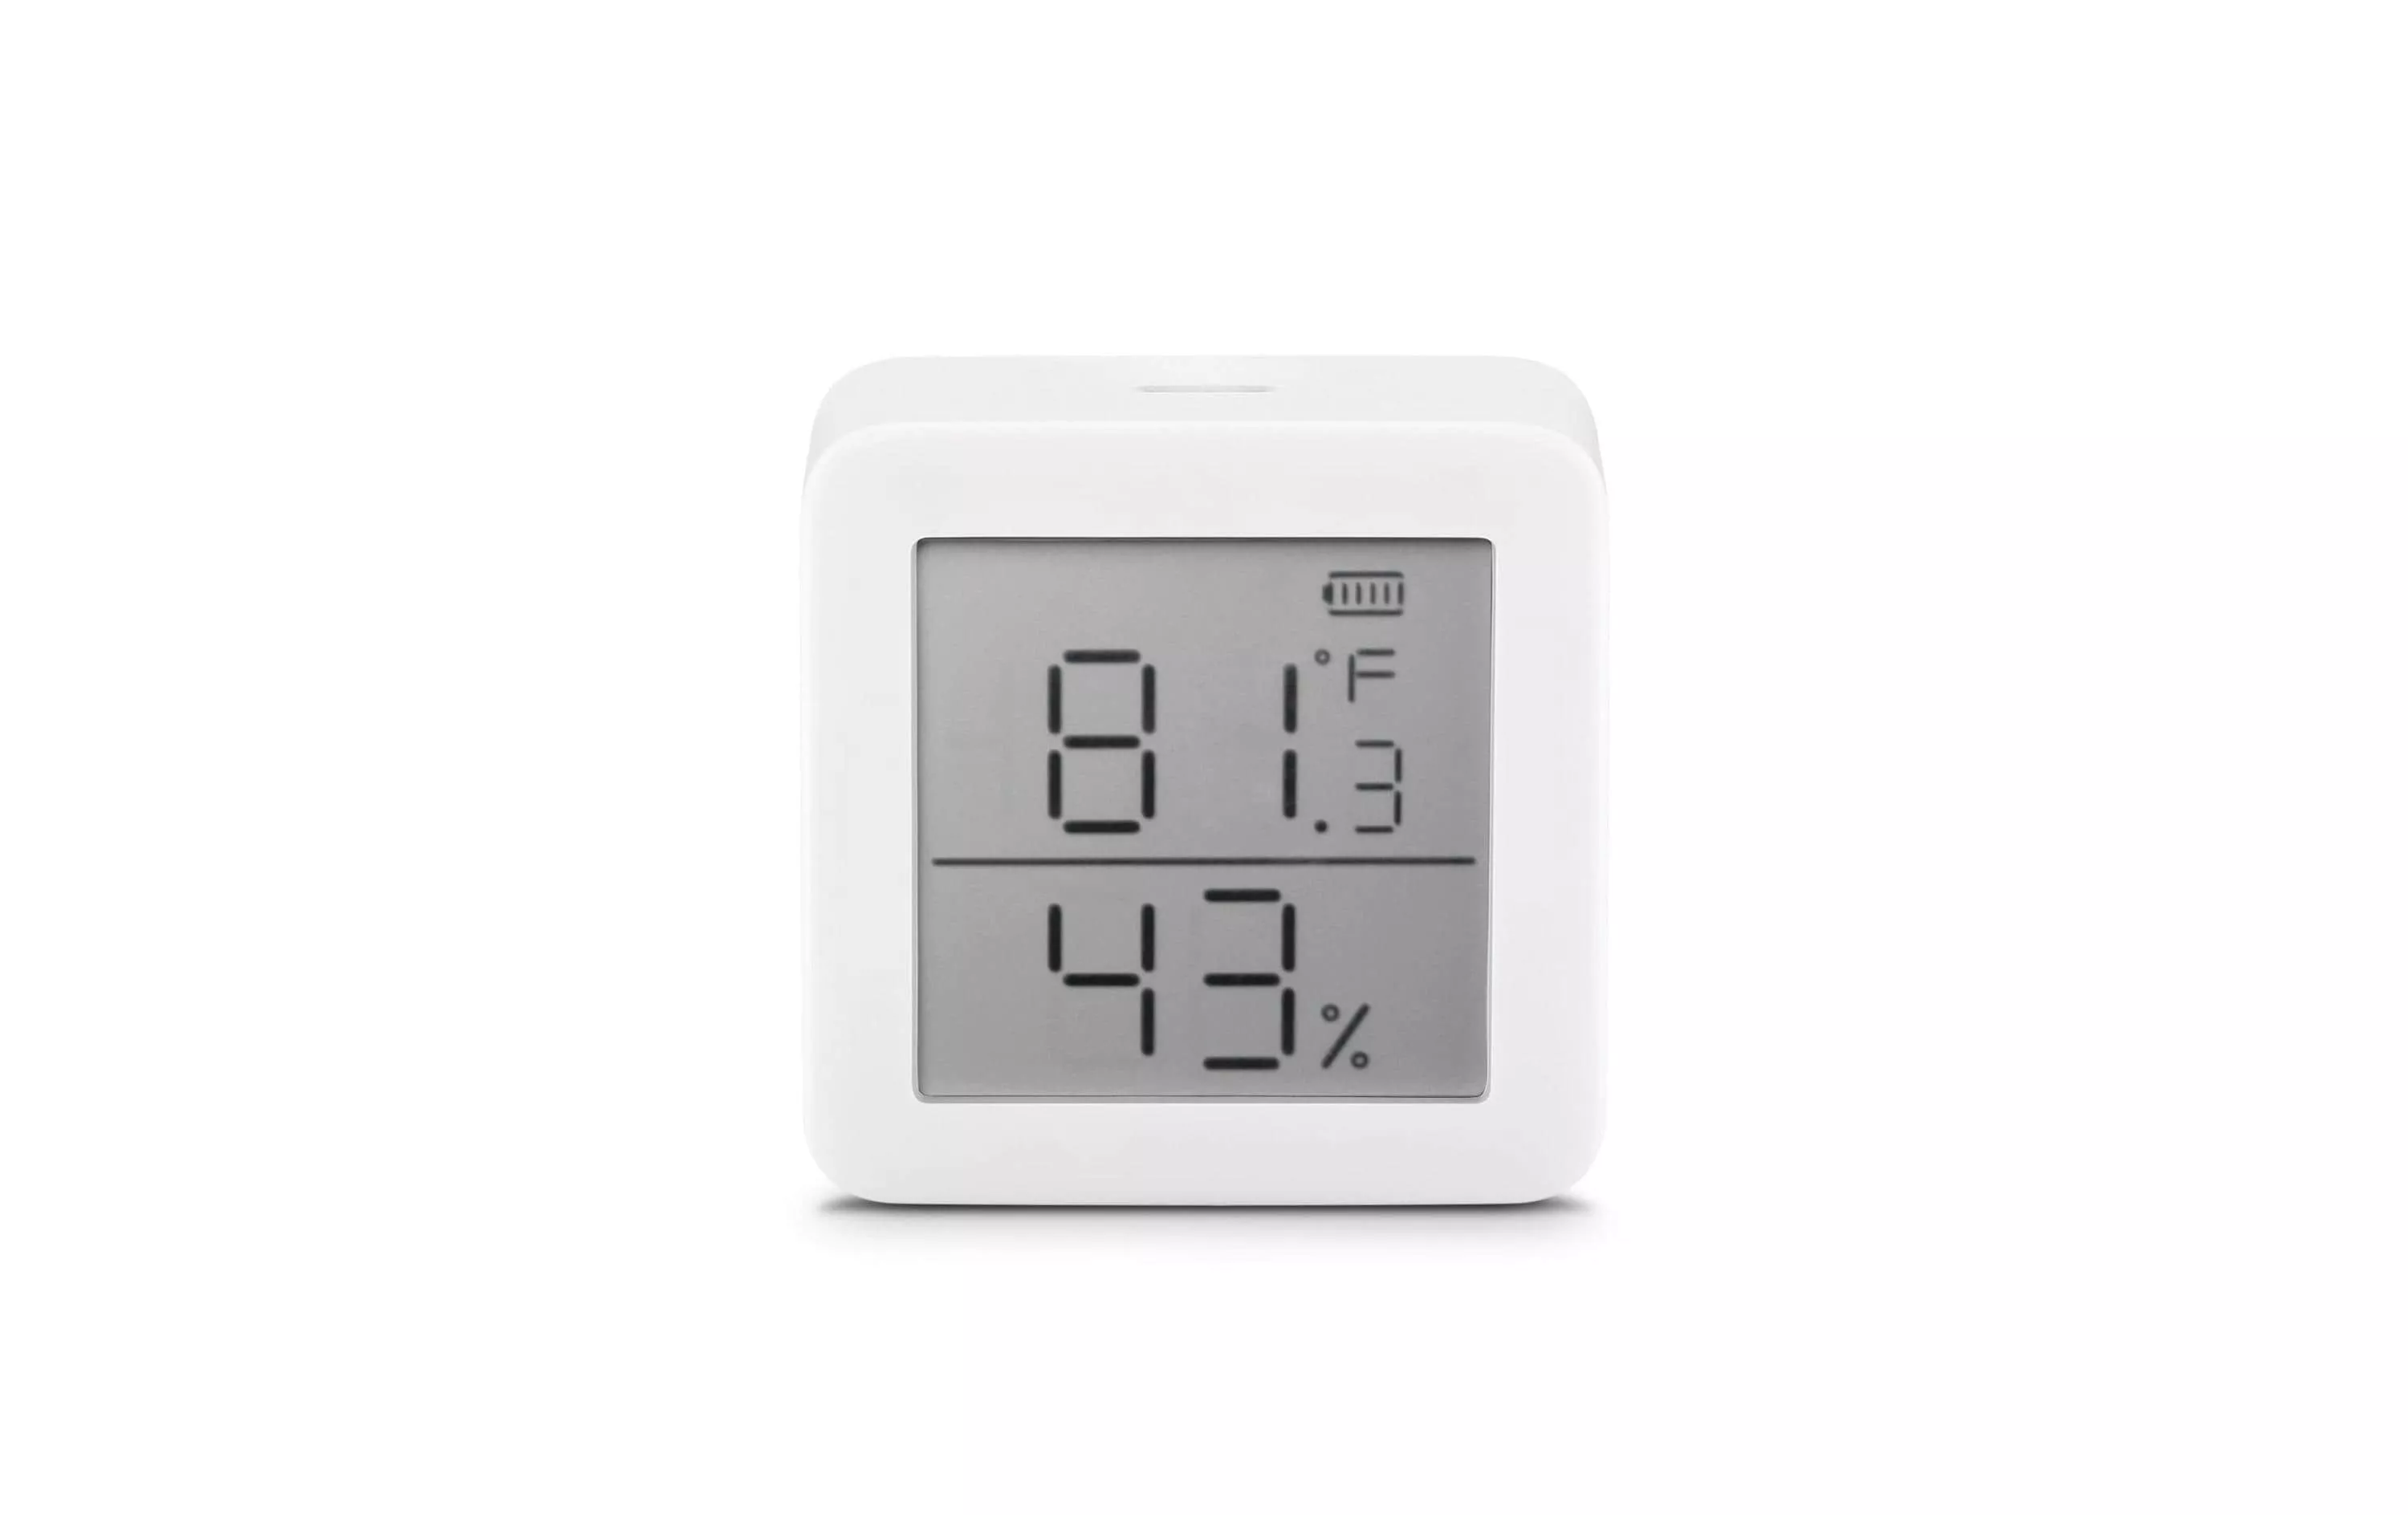 Smartes Innen-Thermometer, Weiss